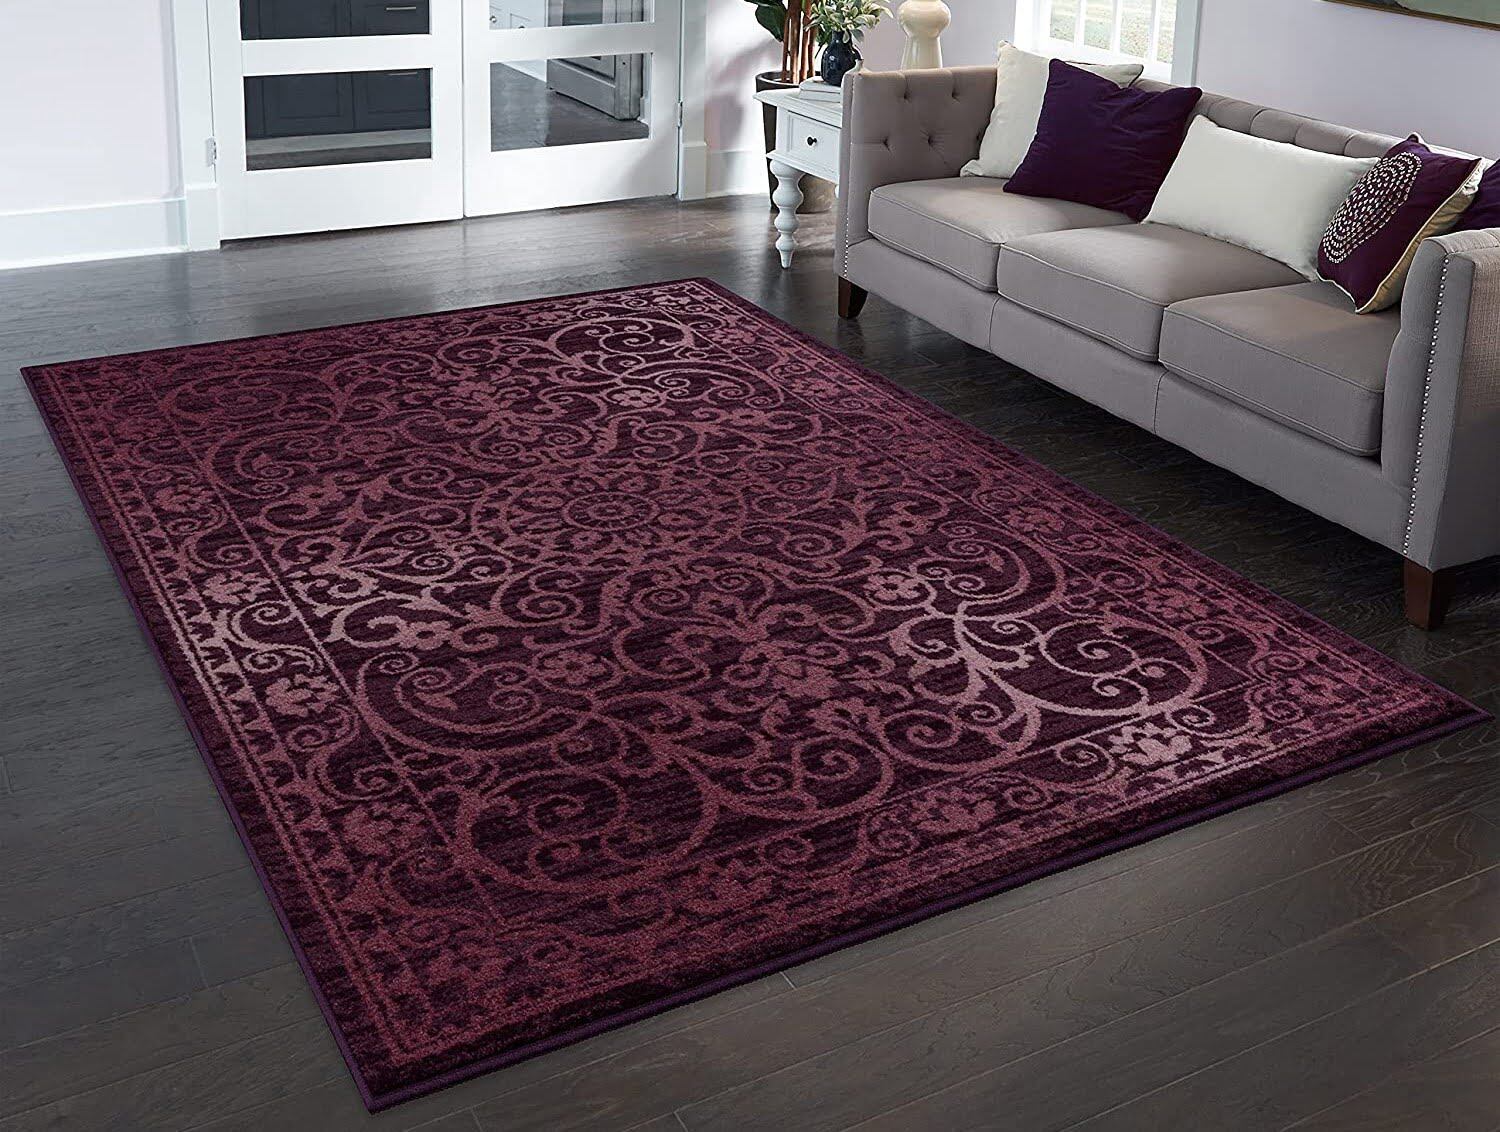 10 Superior Maples Rugs for 2023